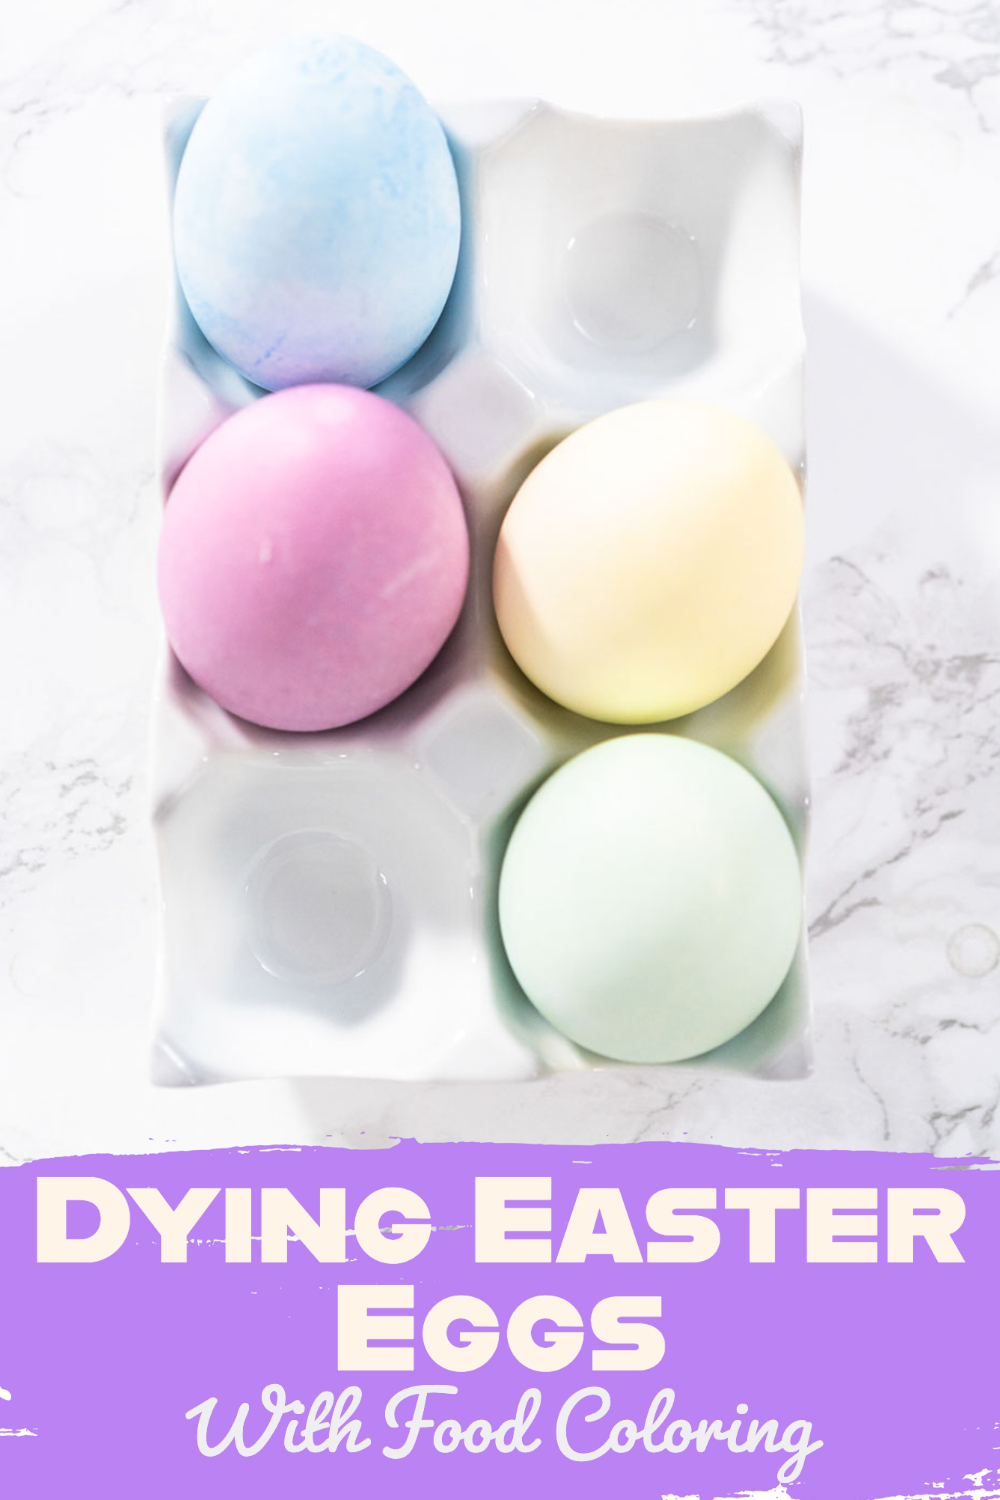 Dying Easter Eggs With Food Coloring